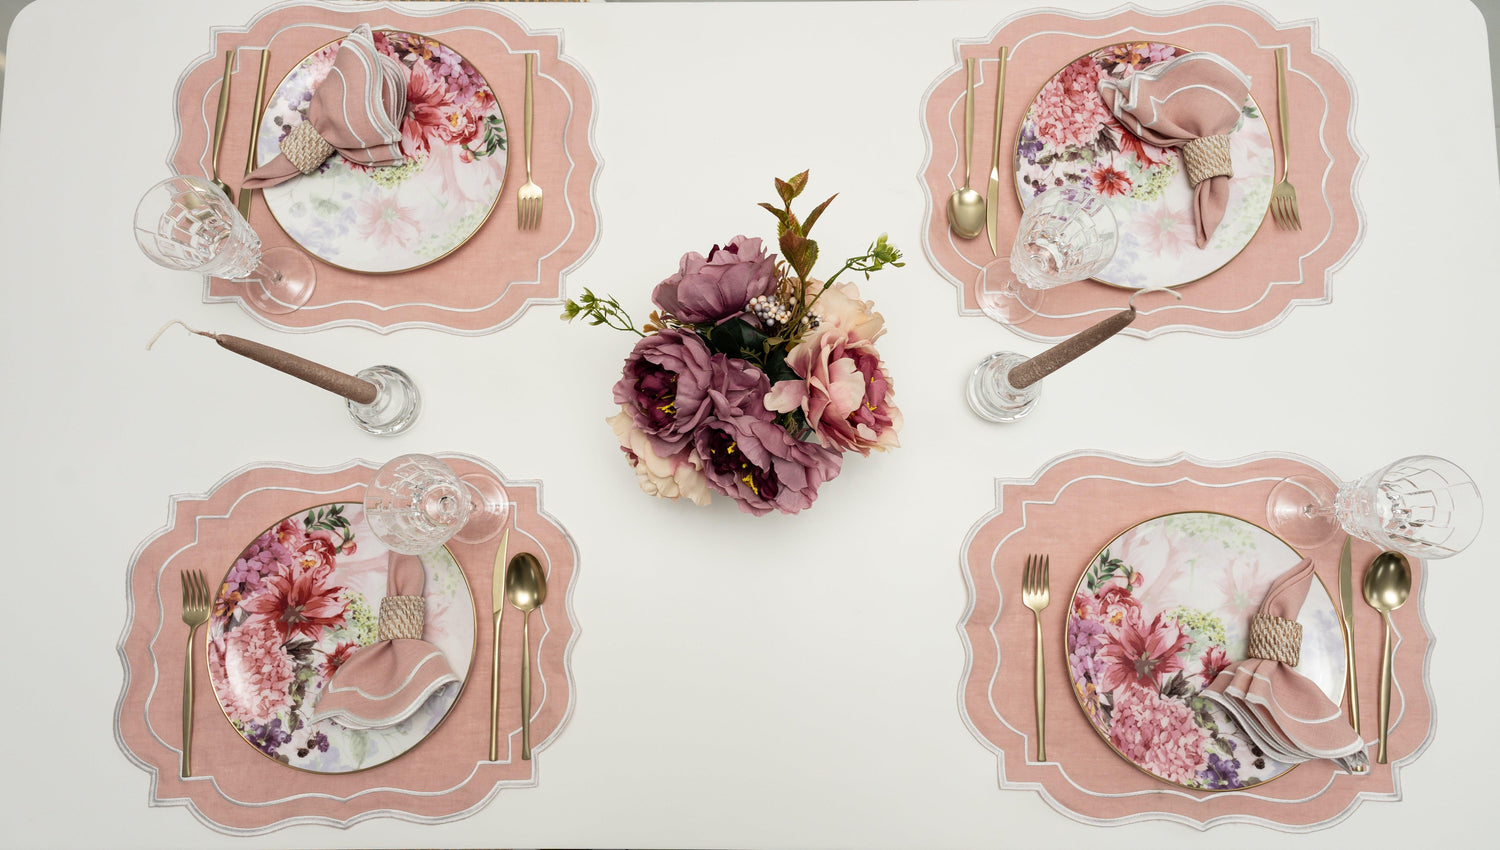 Scalloped Linen Placemats with Plates and Flowers